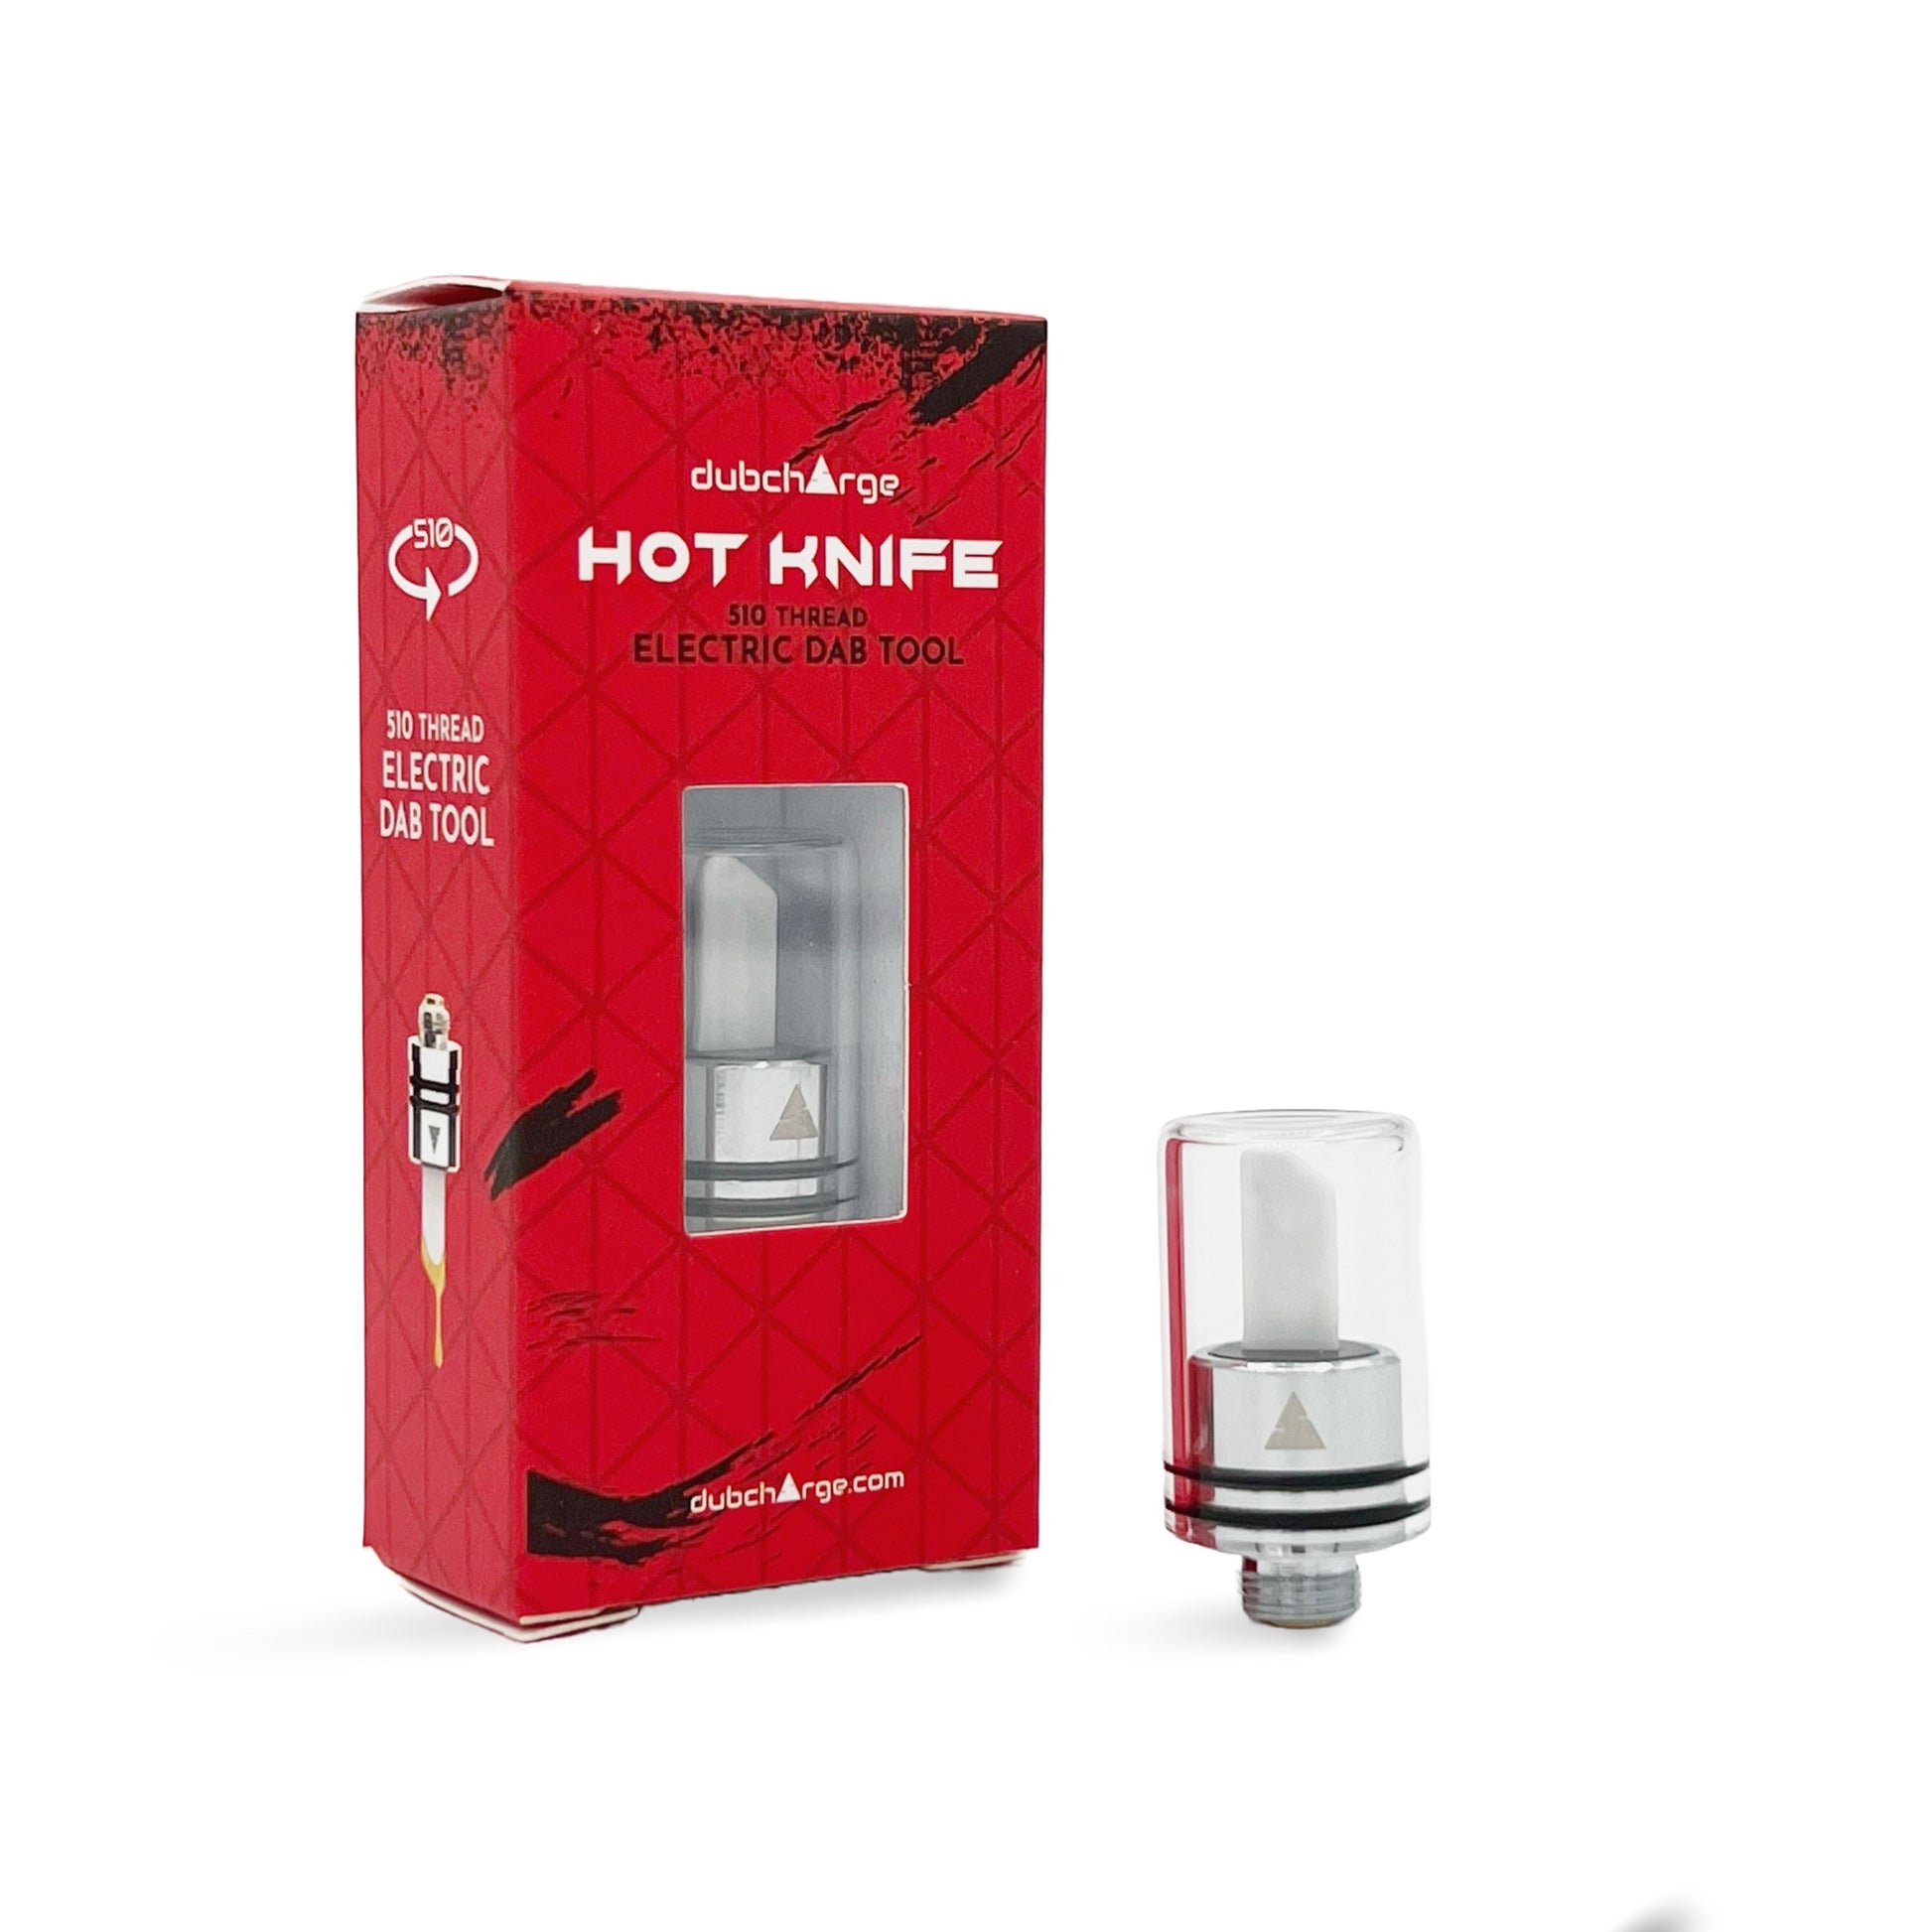 The Puffco Hot Knife Electronic Heated Dab Tool